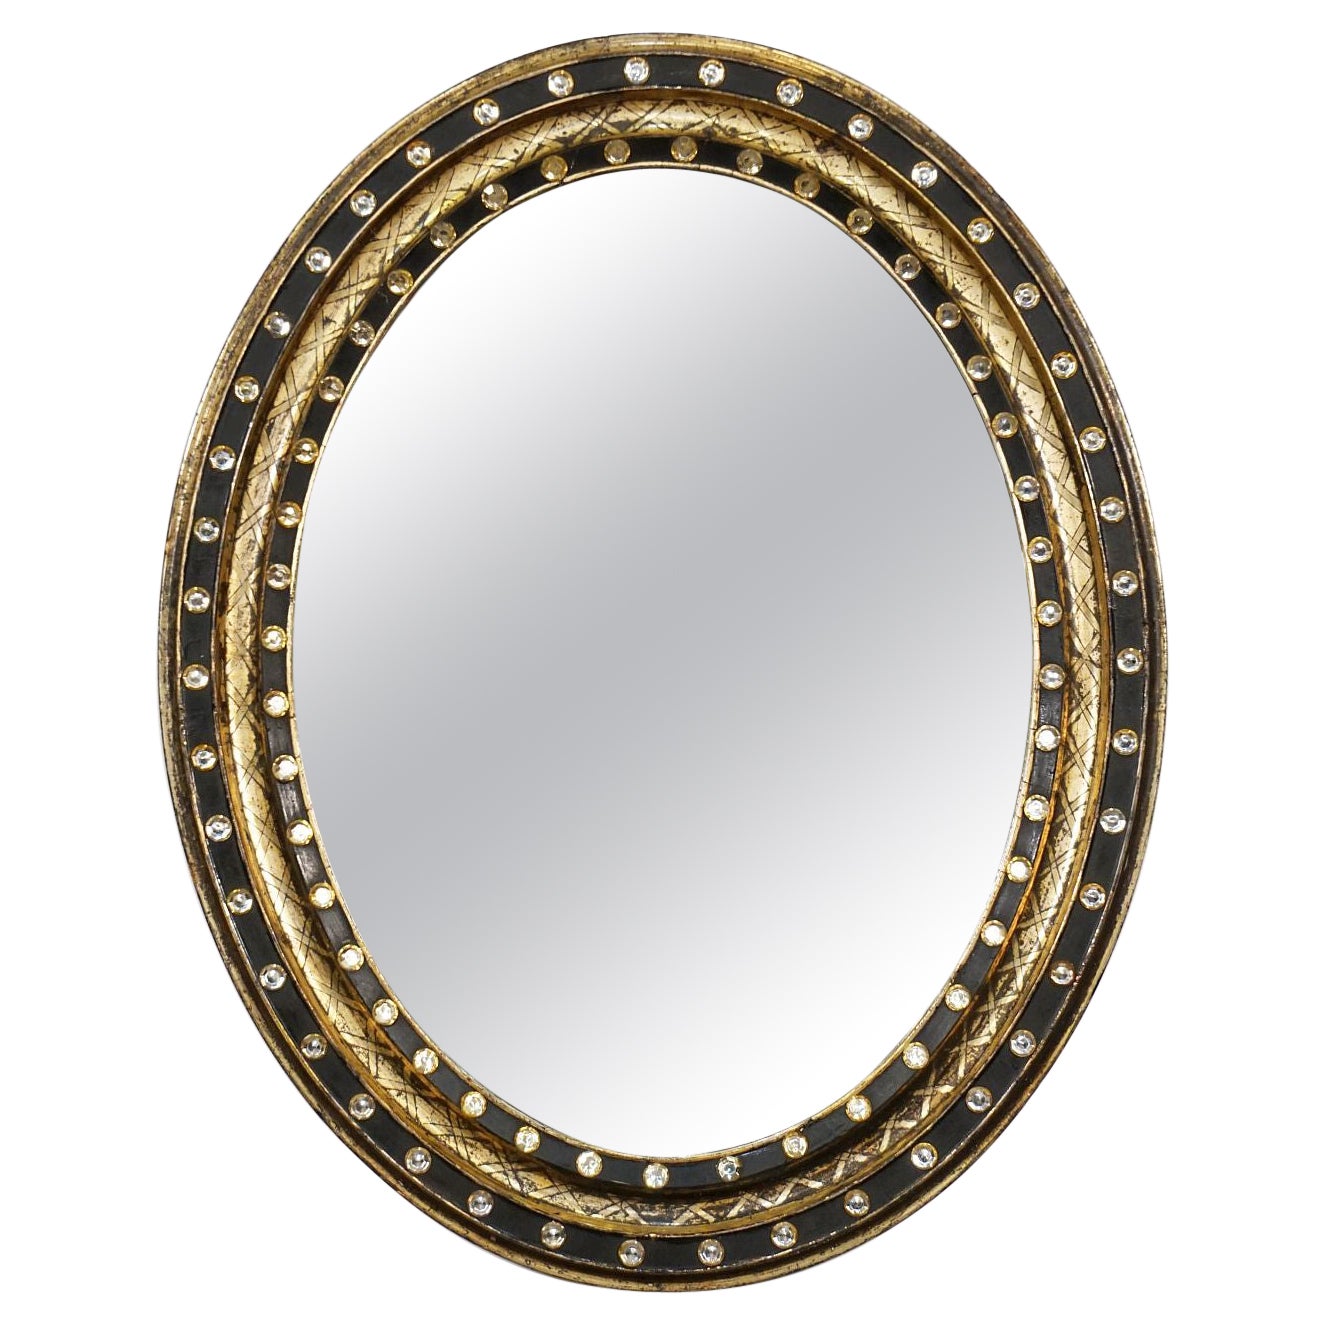 Irish Ebony and Gilt Oval Mirror with Faceted Glass Studs (H 29 1/4 x W 23 1/2)